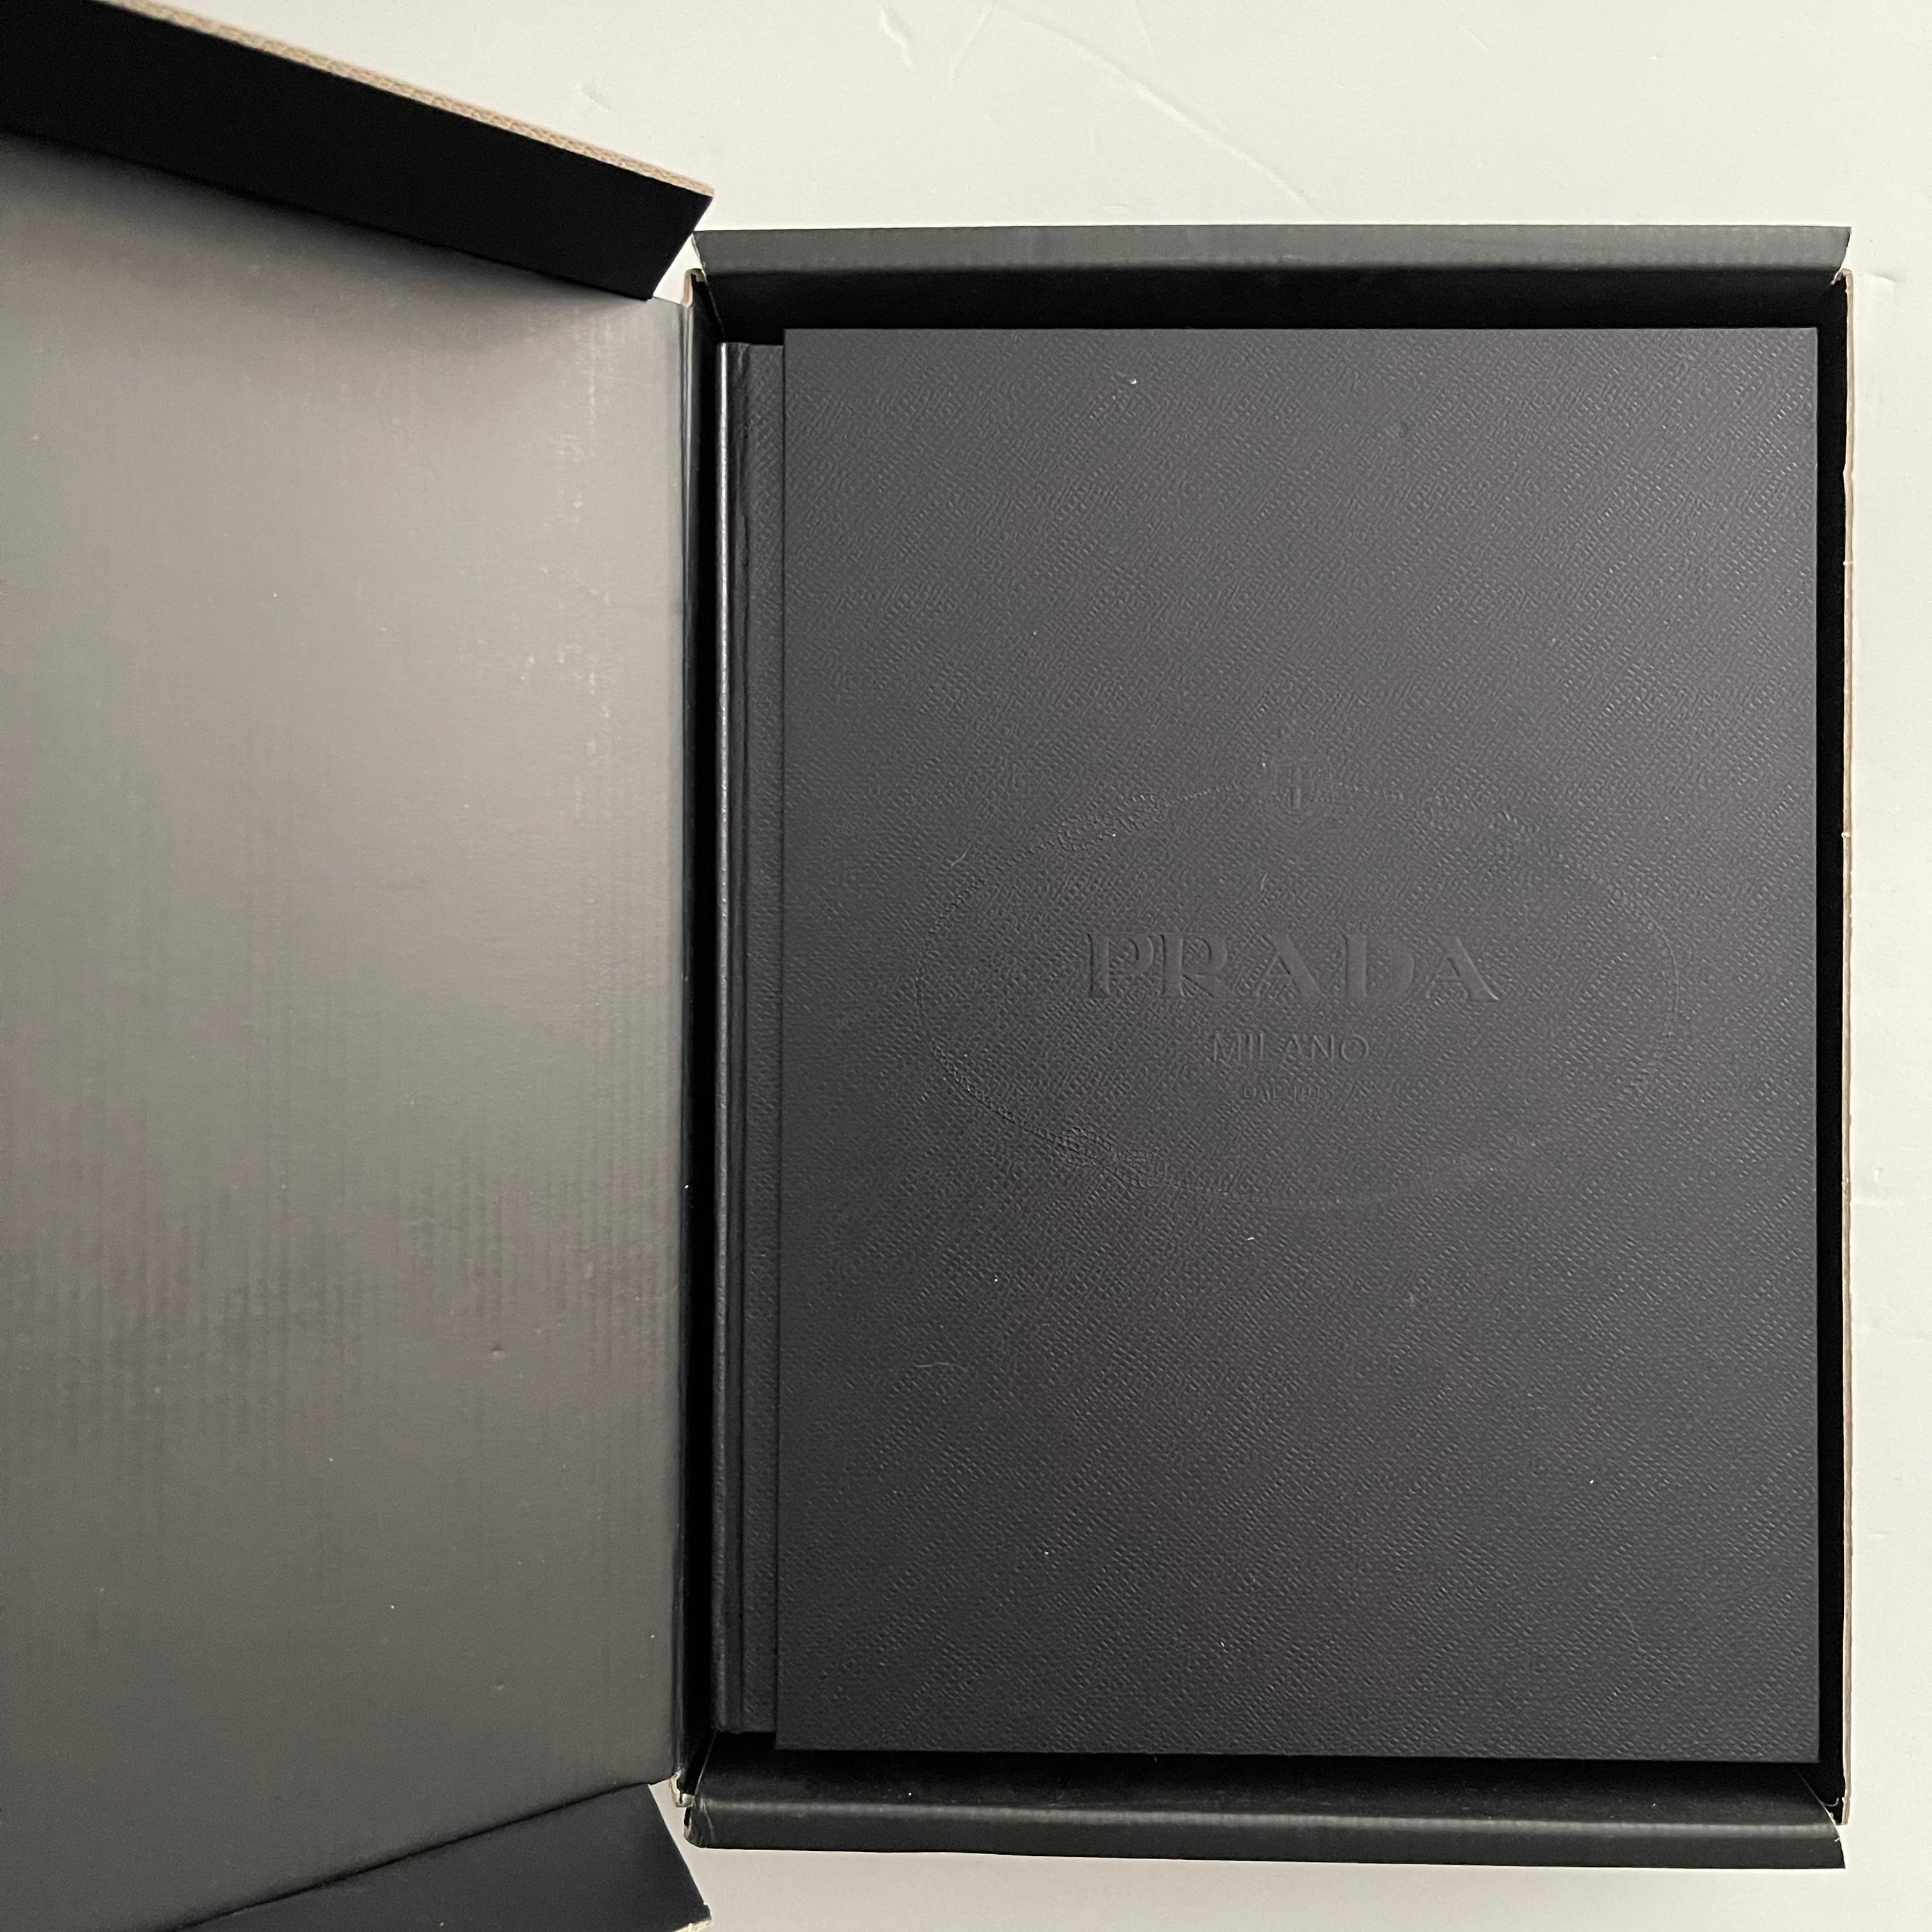 Published by Fondazione Prada, 2009 in slipcase and housed in original box

Prada is the first book that documents three decades of ground-breaking fashion, architecture, film and art by the Prada company, including the work of the design studio and